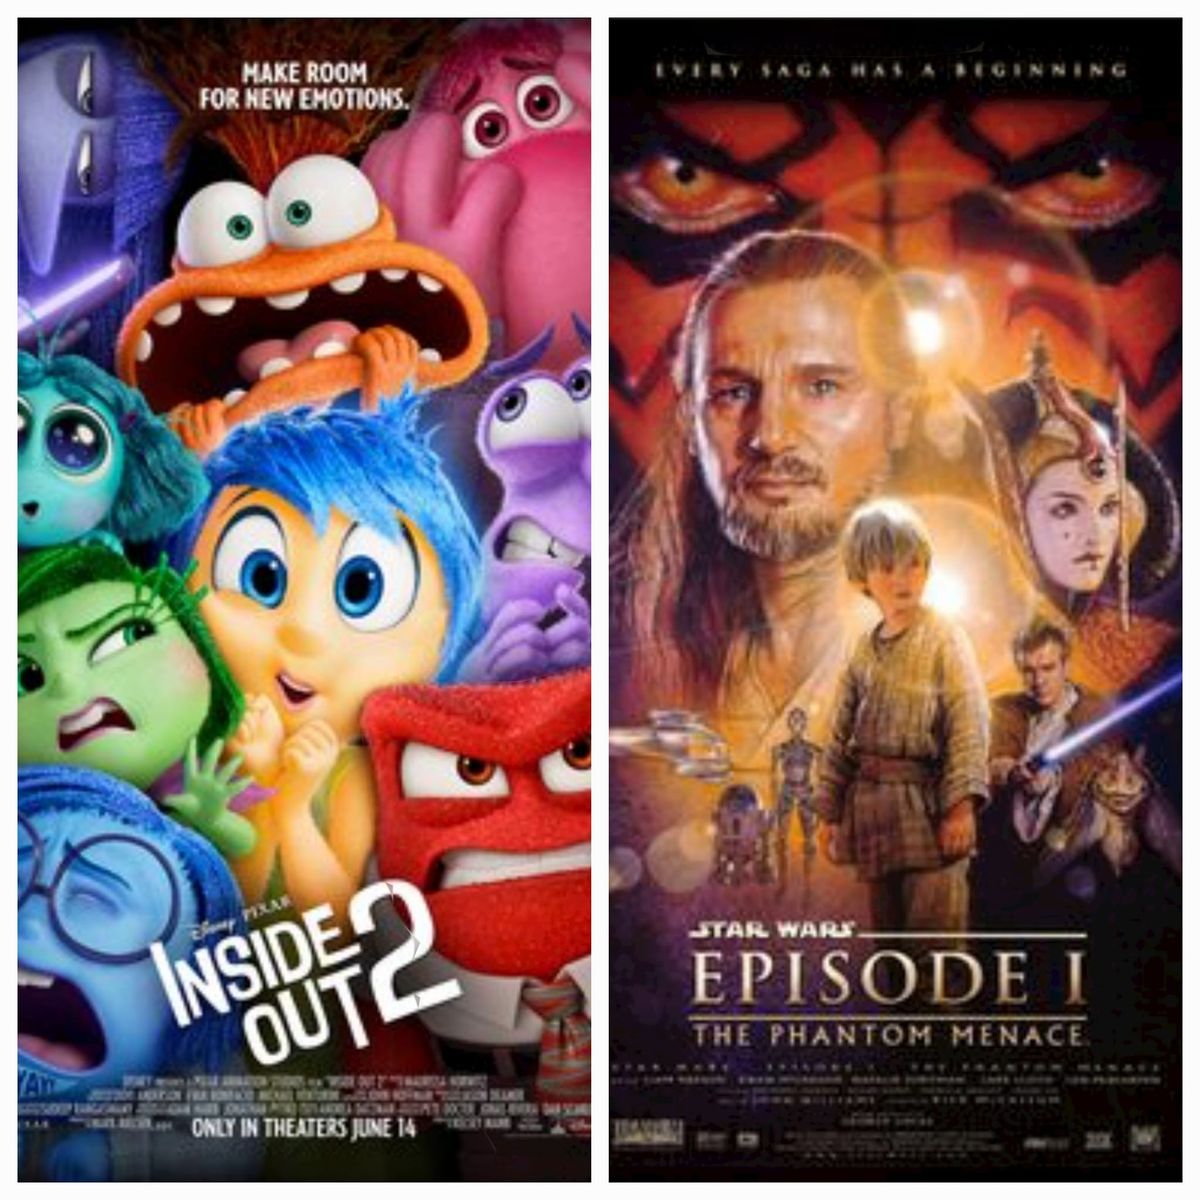 Double Feature showing of Inside Out 2 & Star Wars Ep. 1